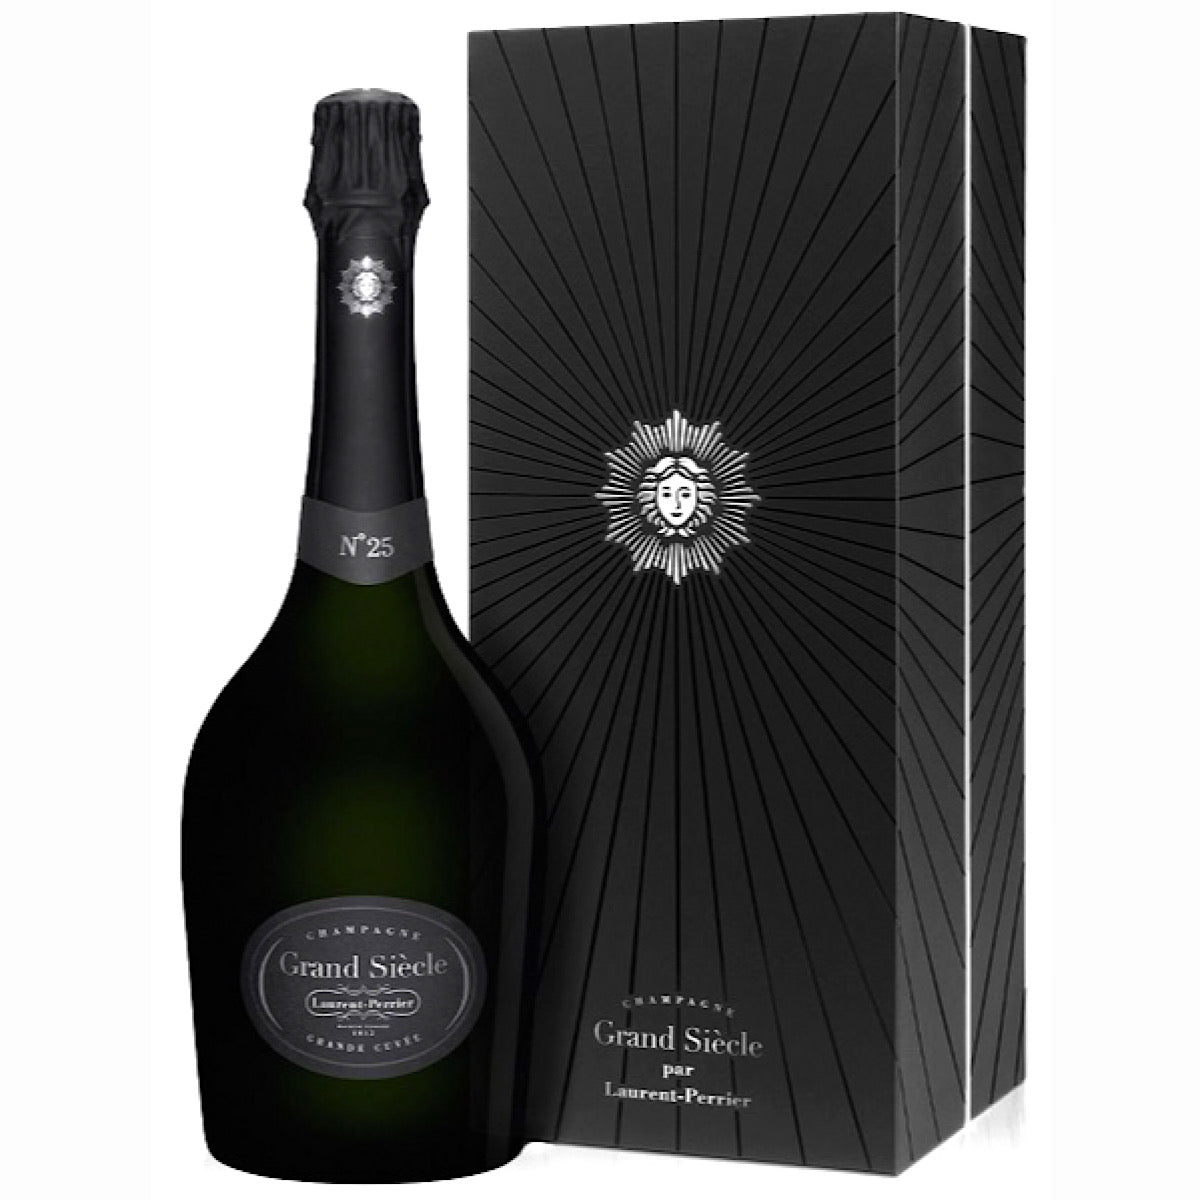 Laurent-Perrier Grand Siècle Iteration 25 in Gift Box 75cl